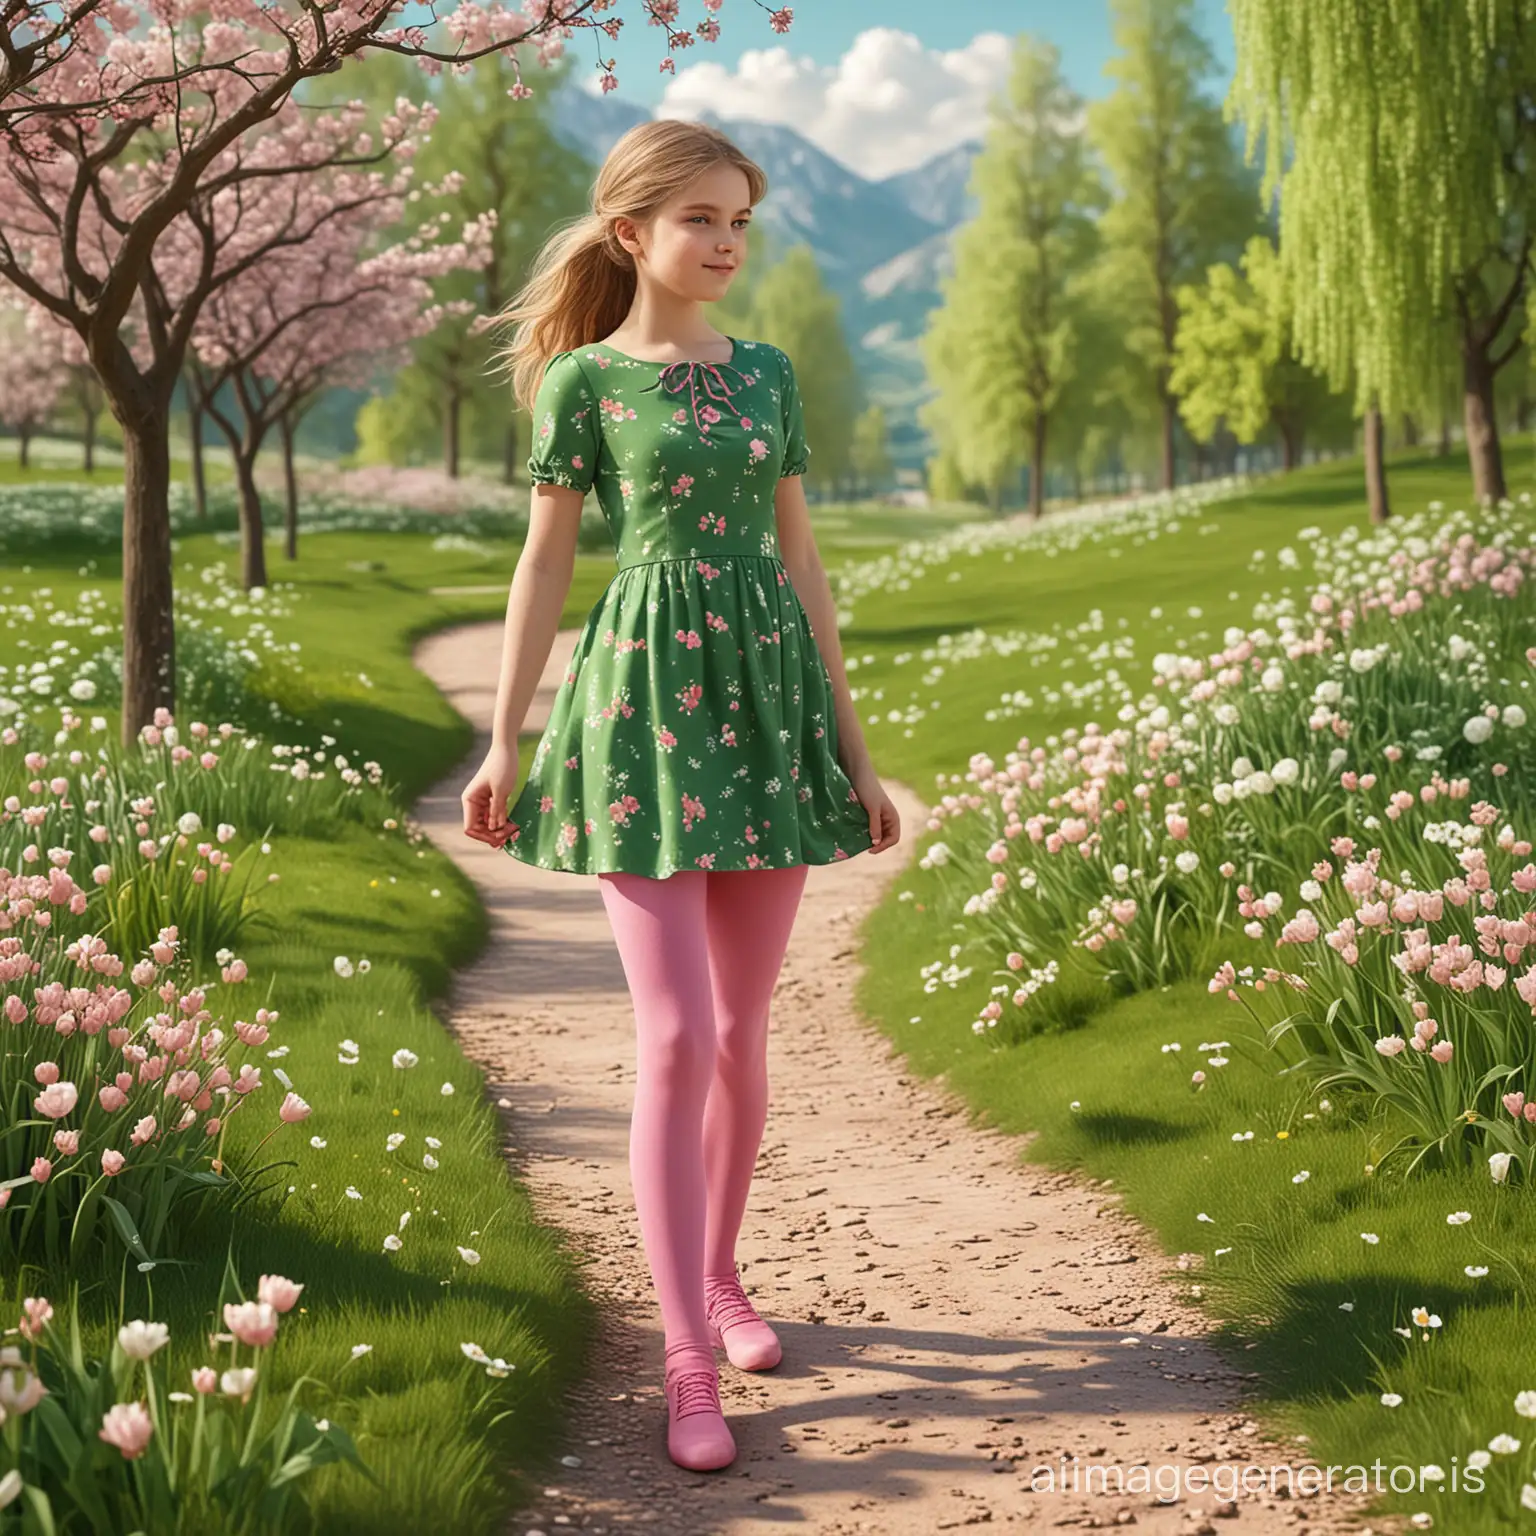 3D graphics: a spring landscape and a girl dressed in a green dress and pink tights